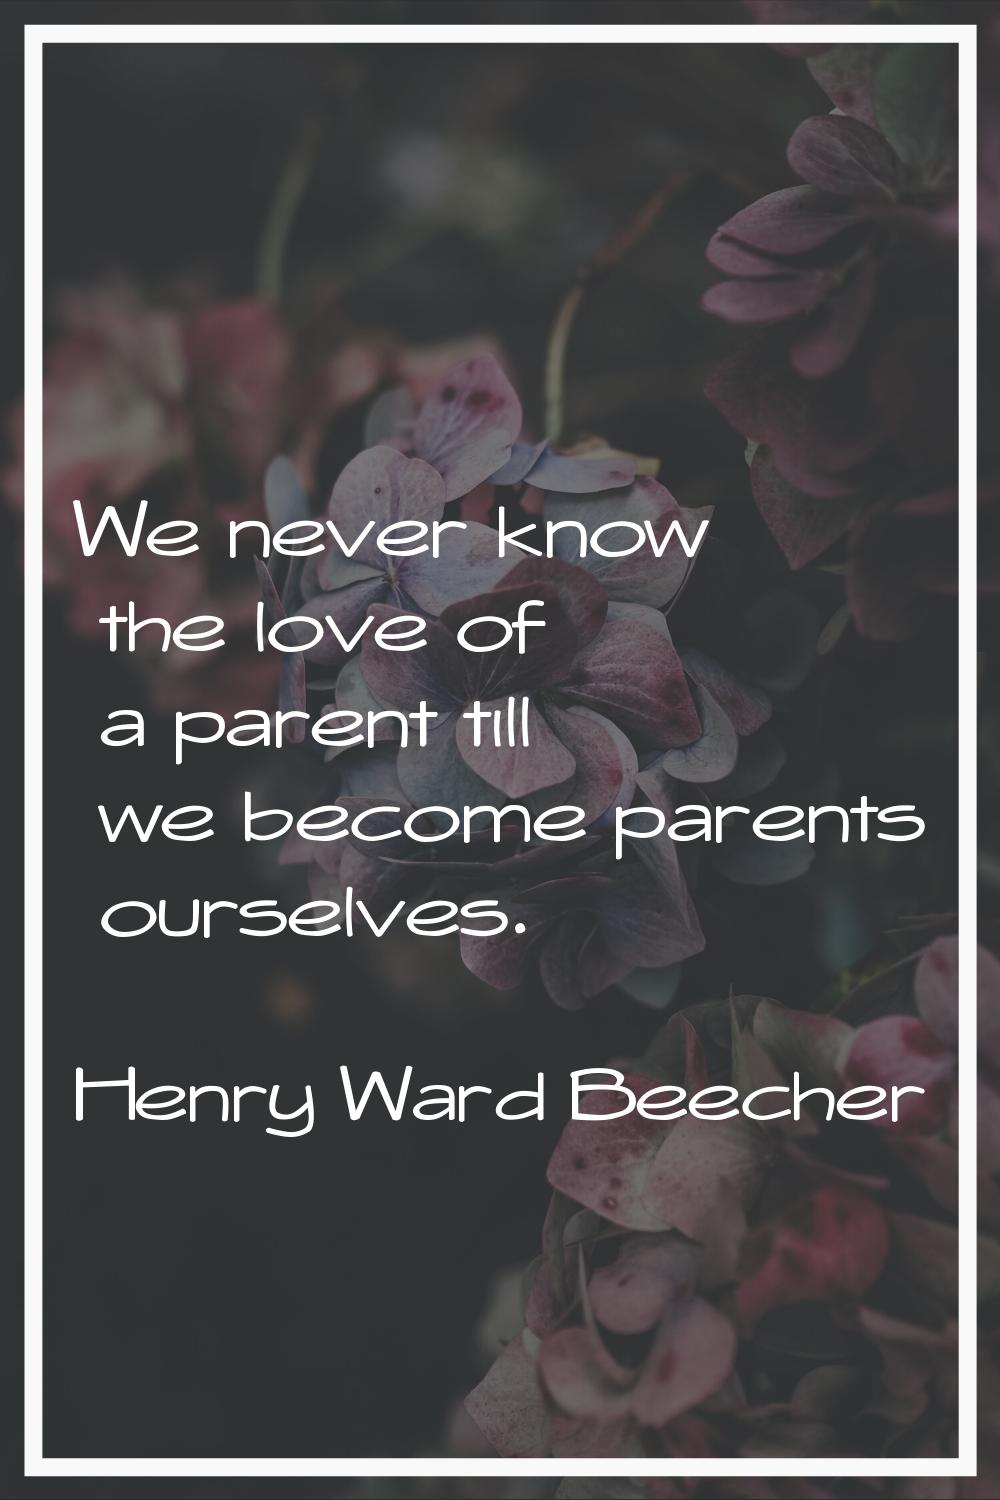 We never know the love of a parent till we become parents ourselves.